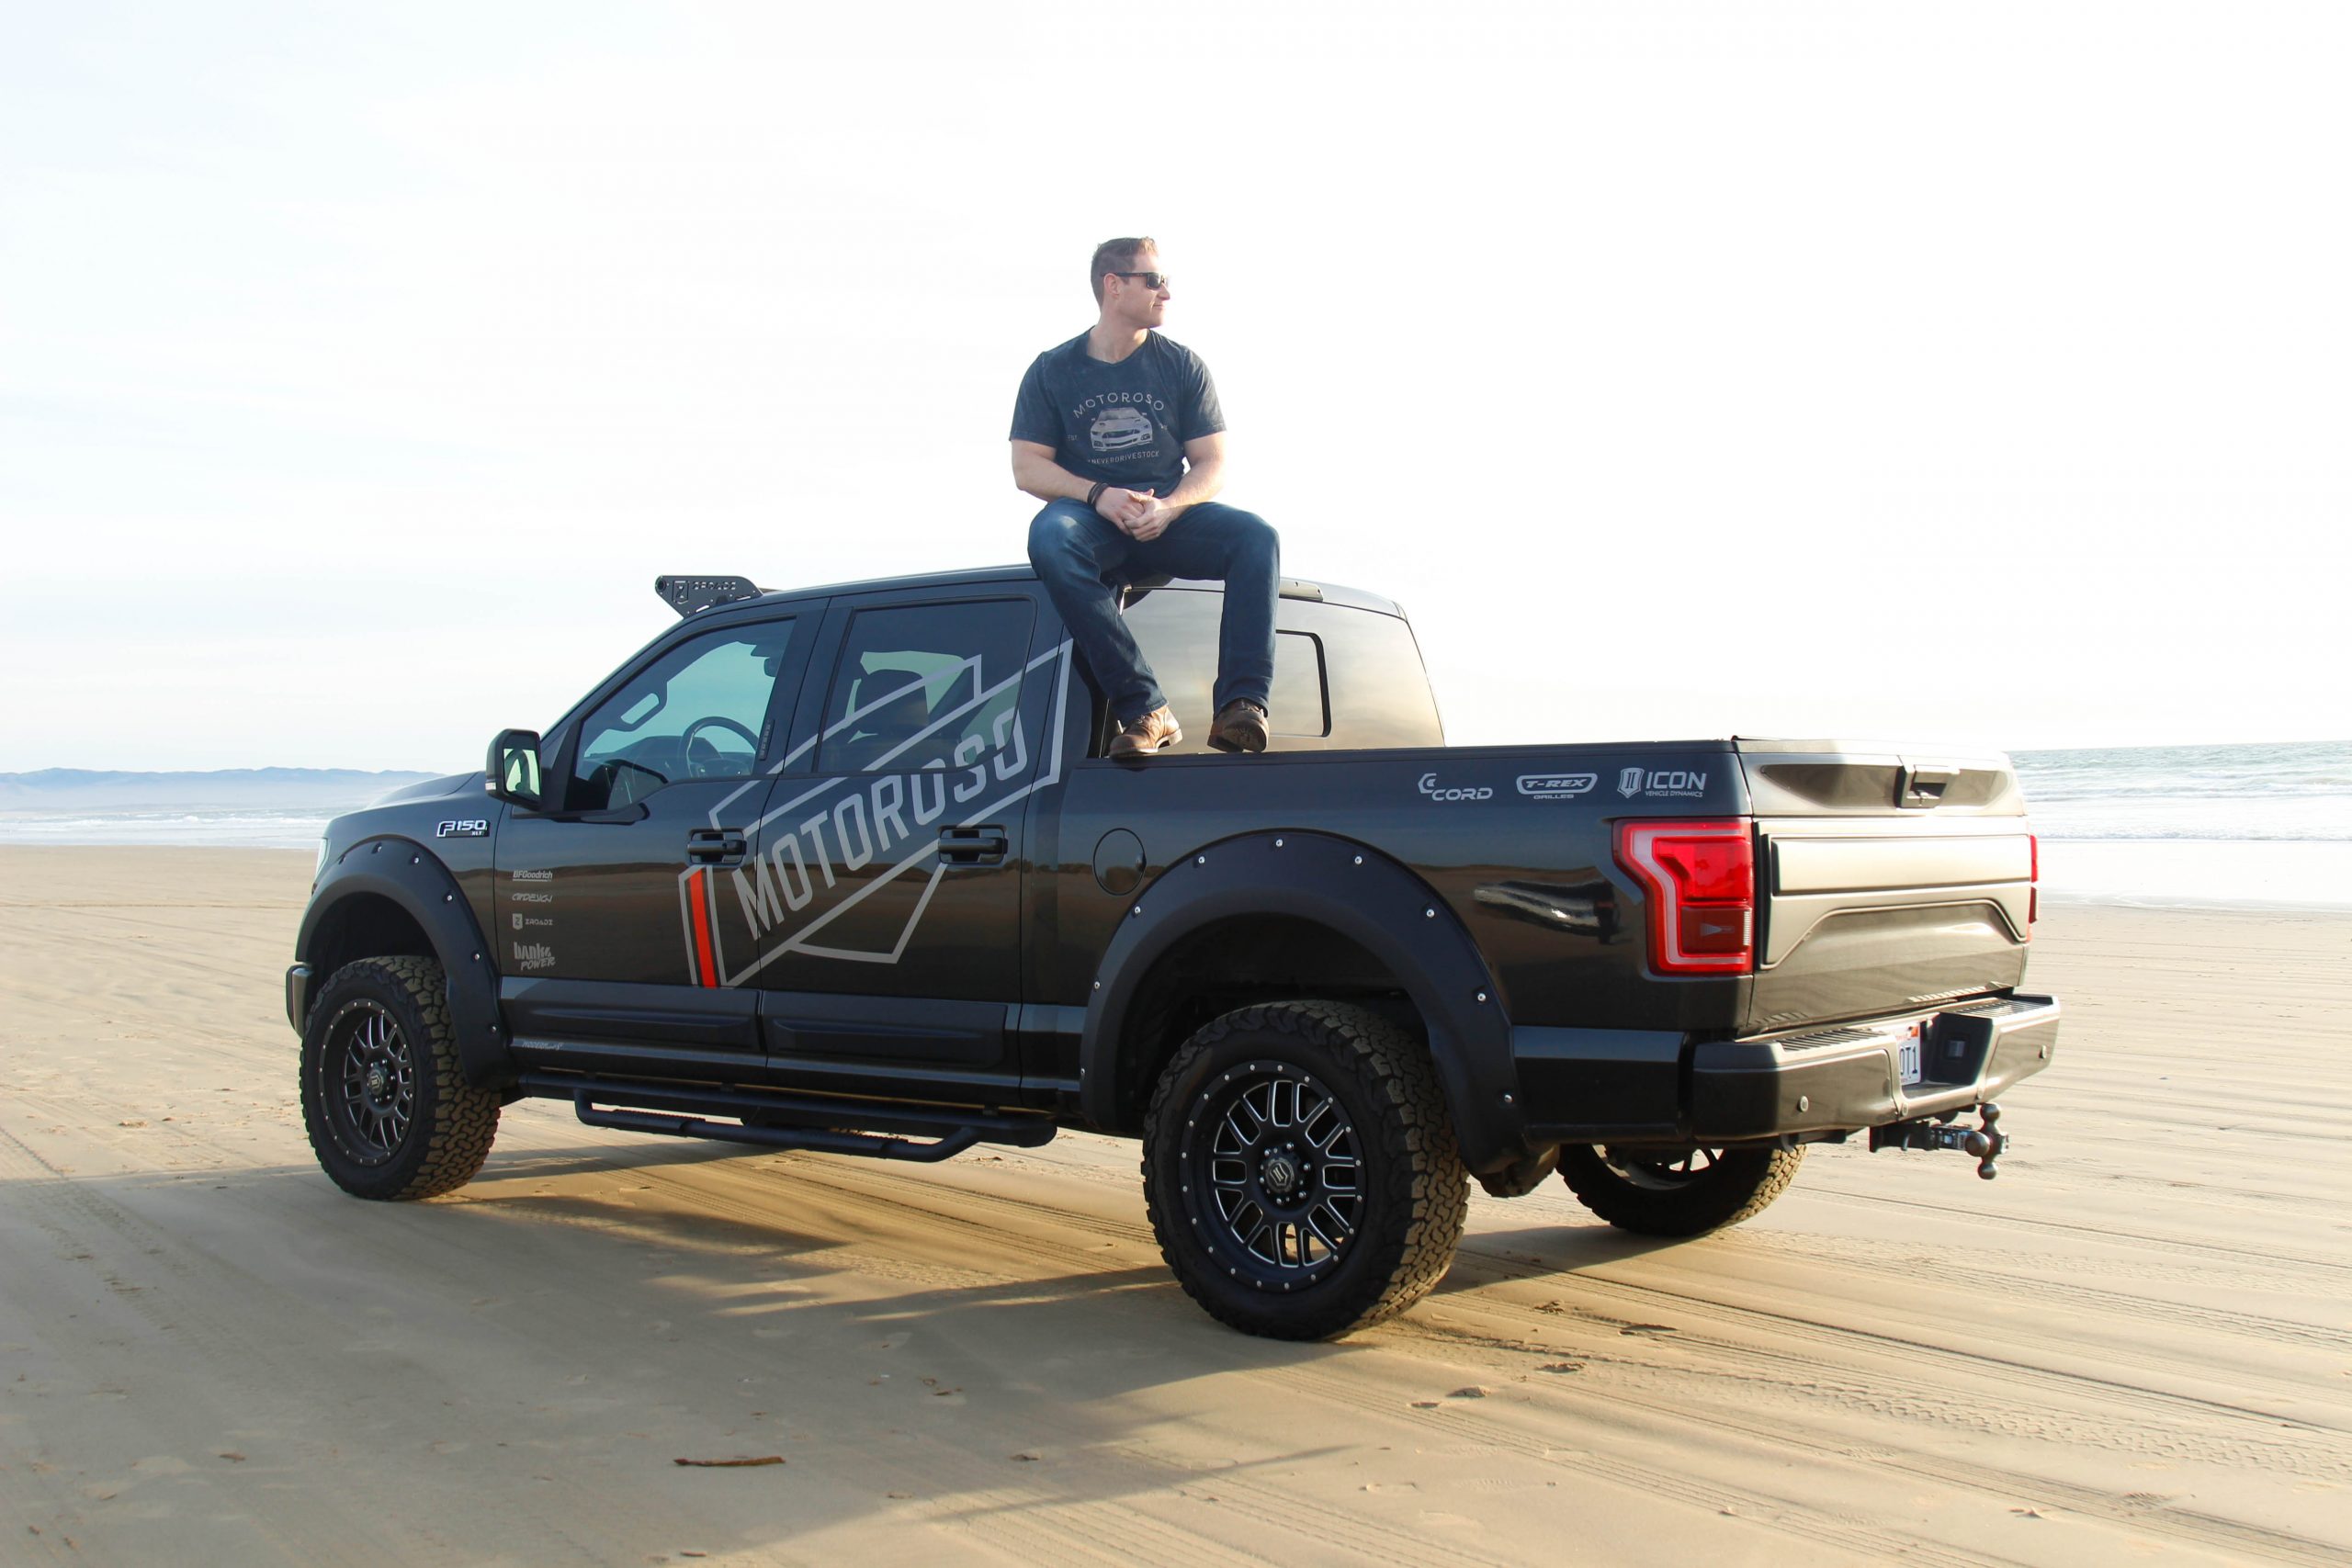 Founder of Motoroso sitting on the roof of his black pickup truck on the beach.